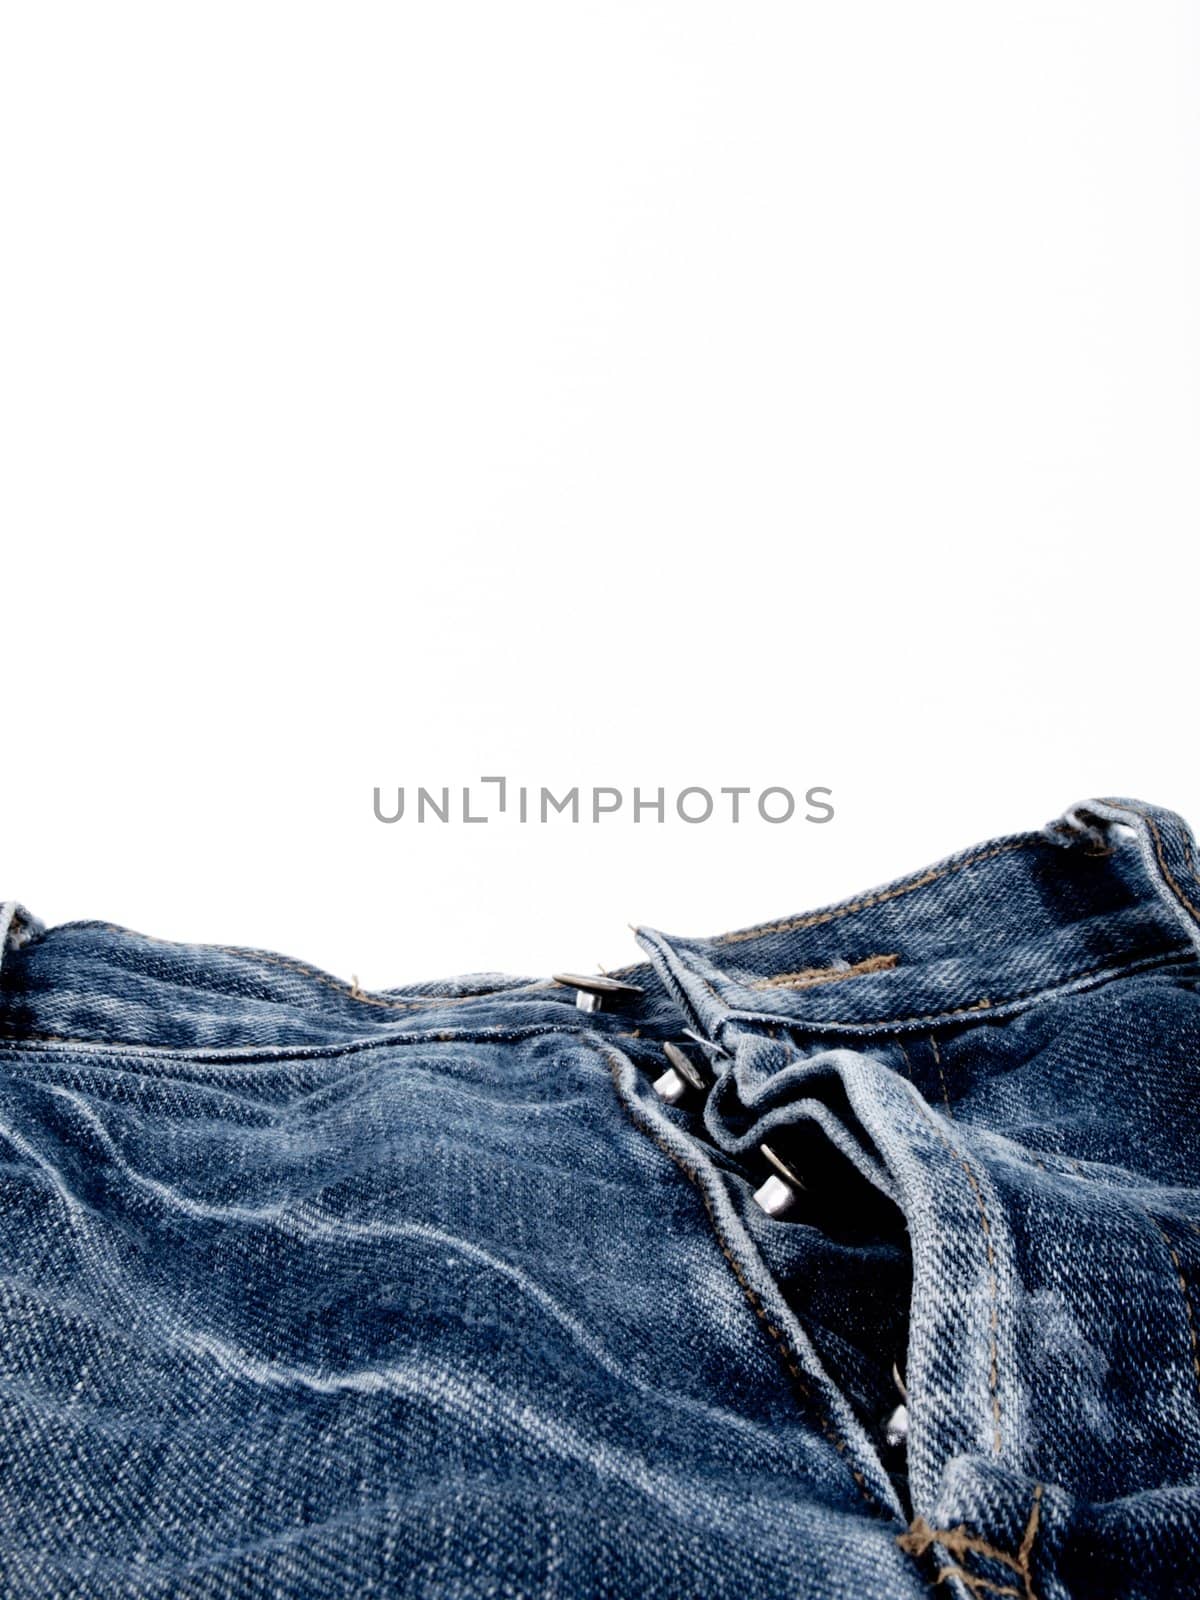 Blue button fly jeans background by cocoyjurado9000